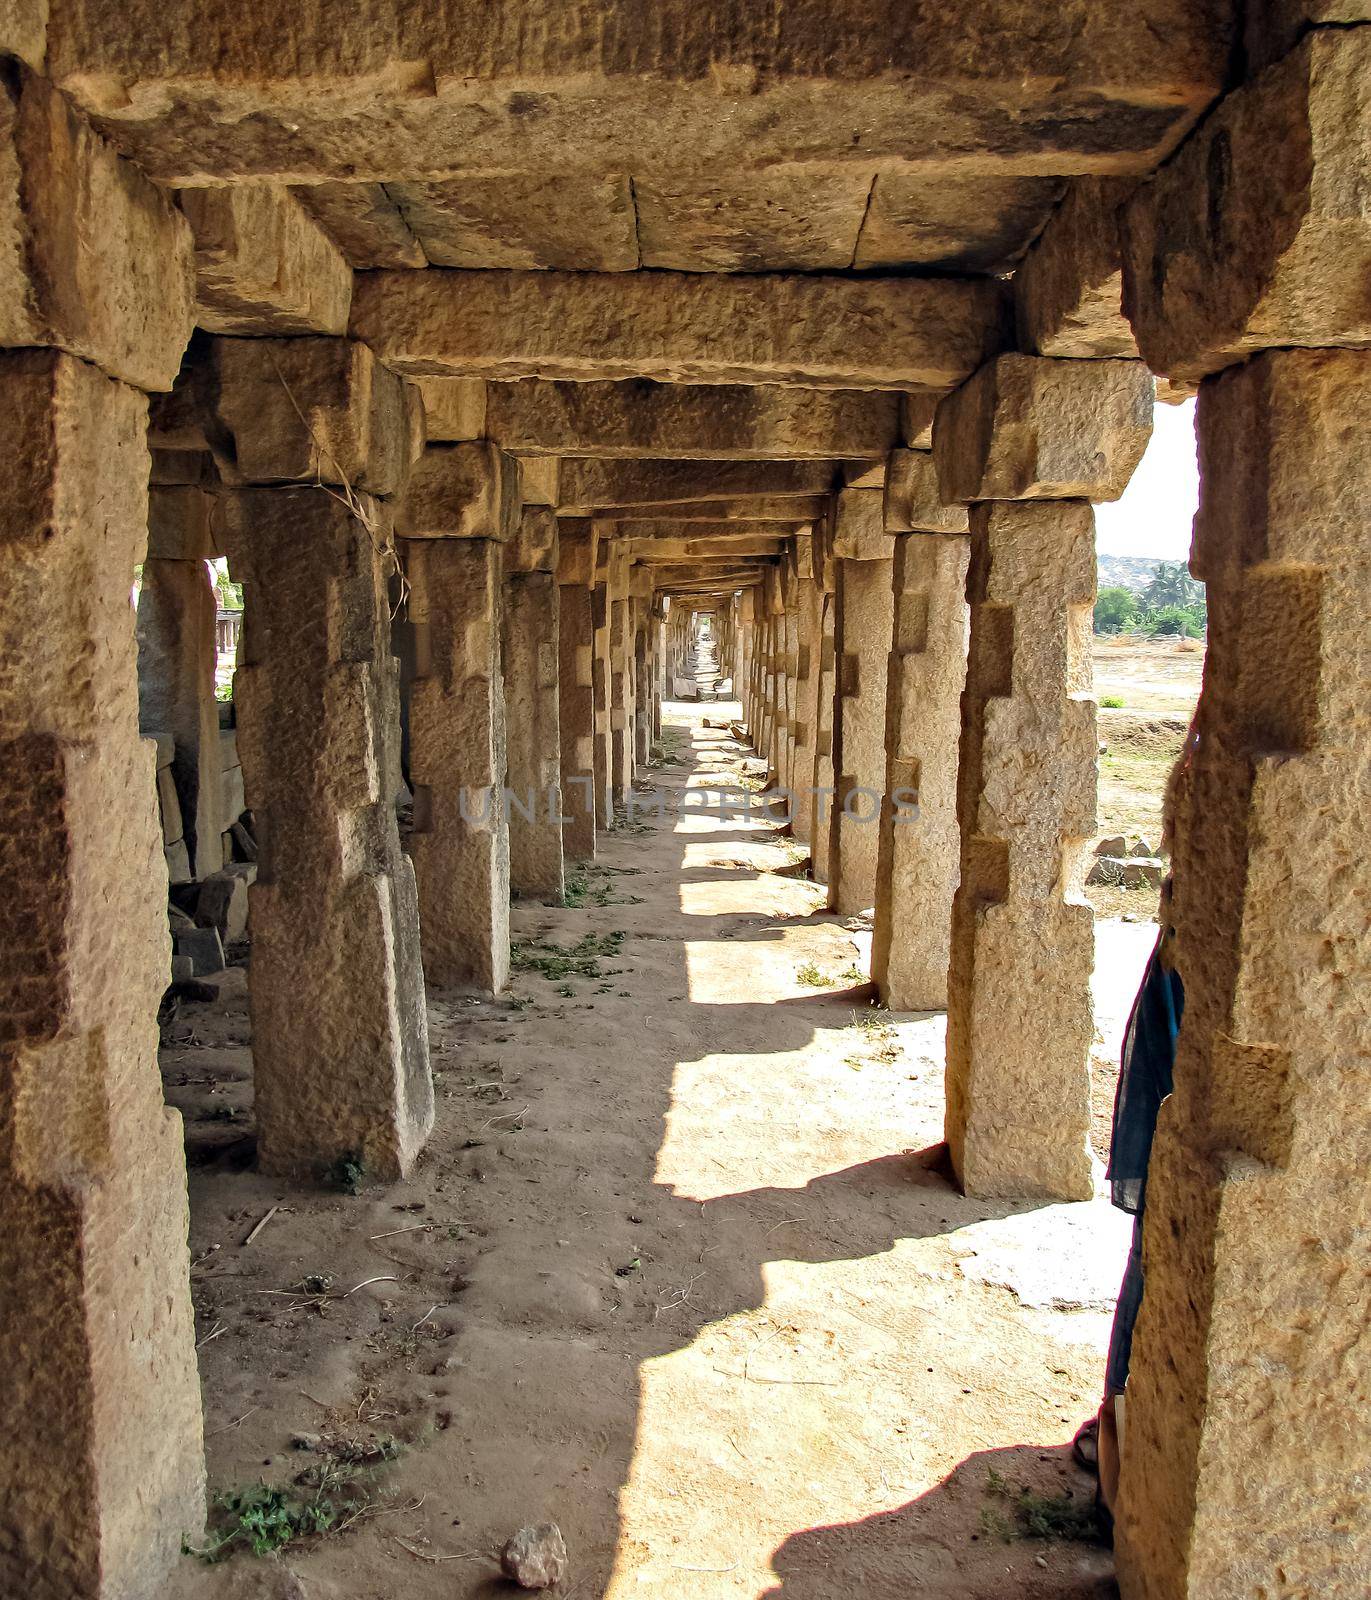 Inside view of ancient stone made Hampi bazaar or market place by lalam